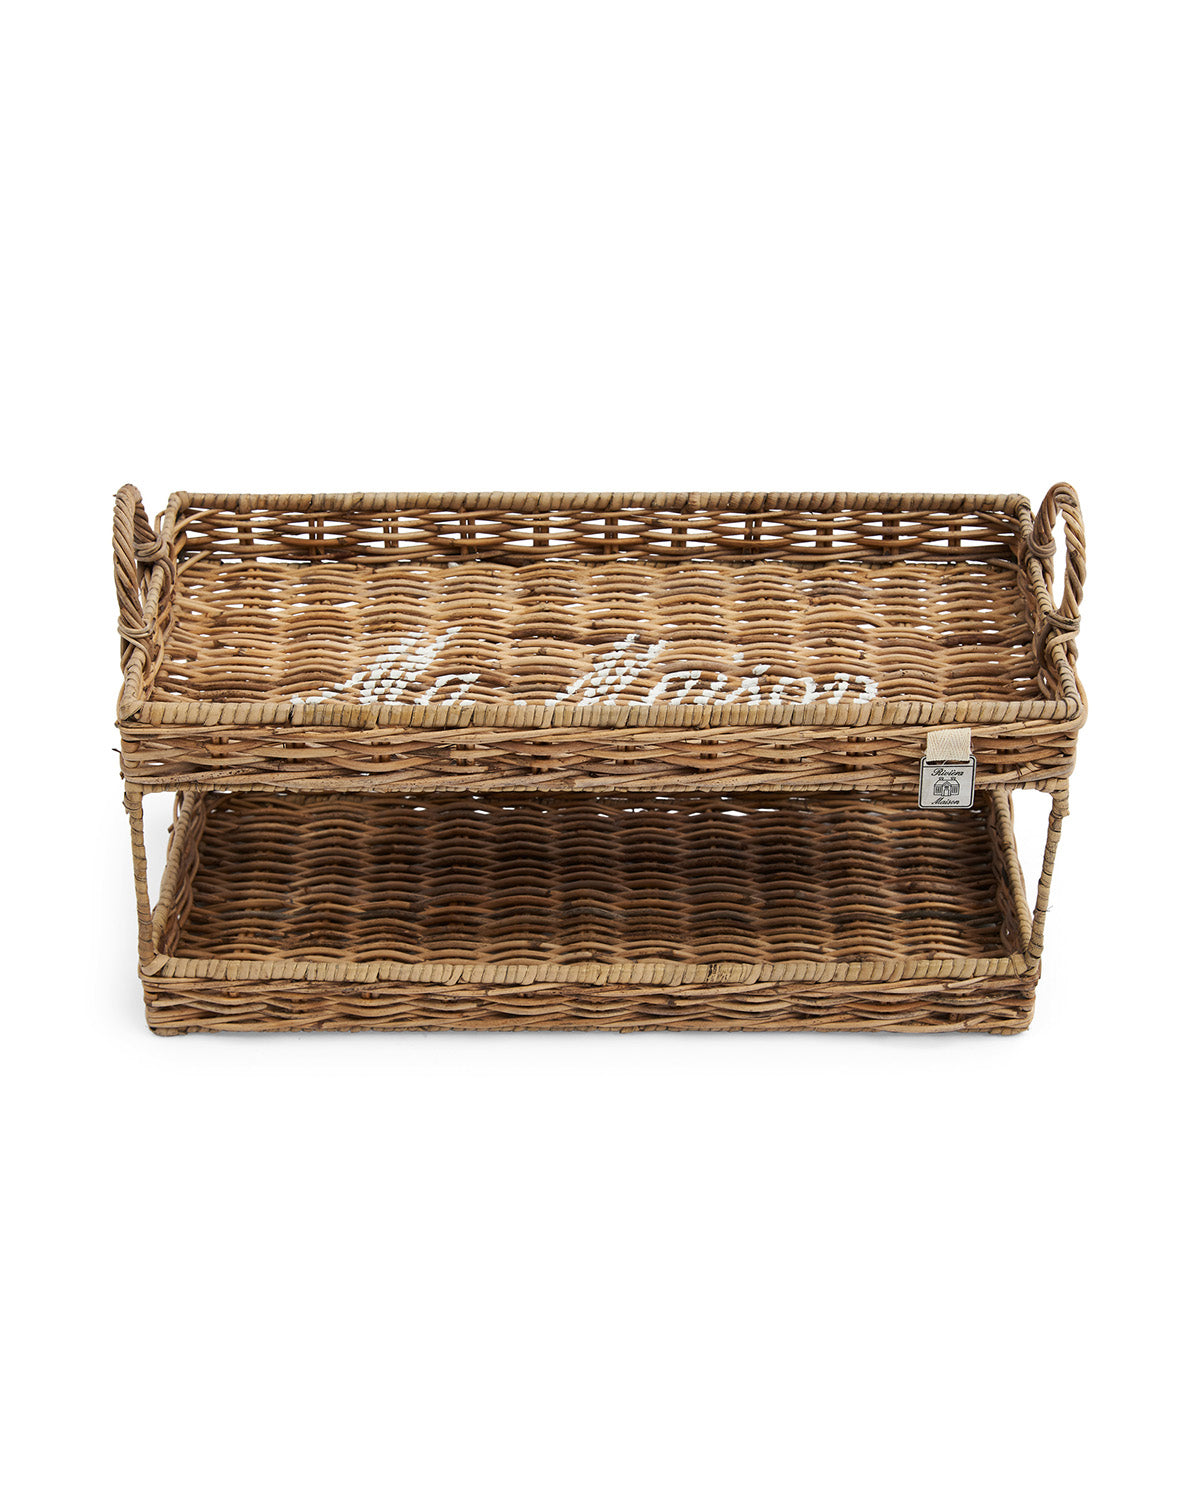 DOUBLE TRAY made of wicker tube by Riviera Maison